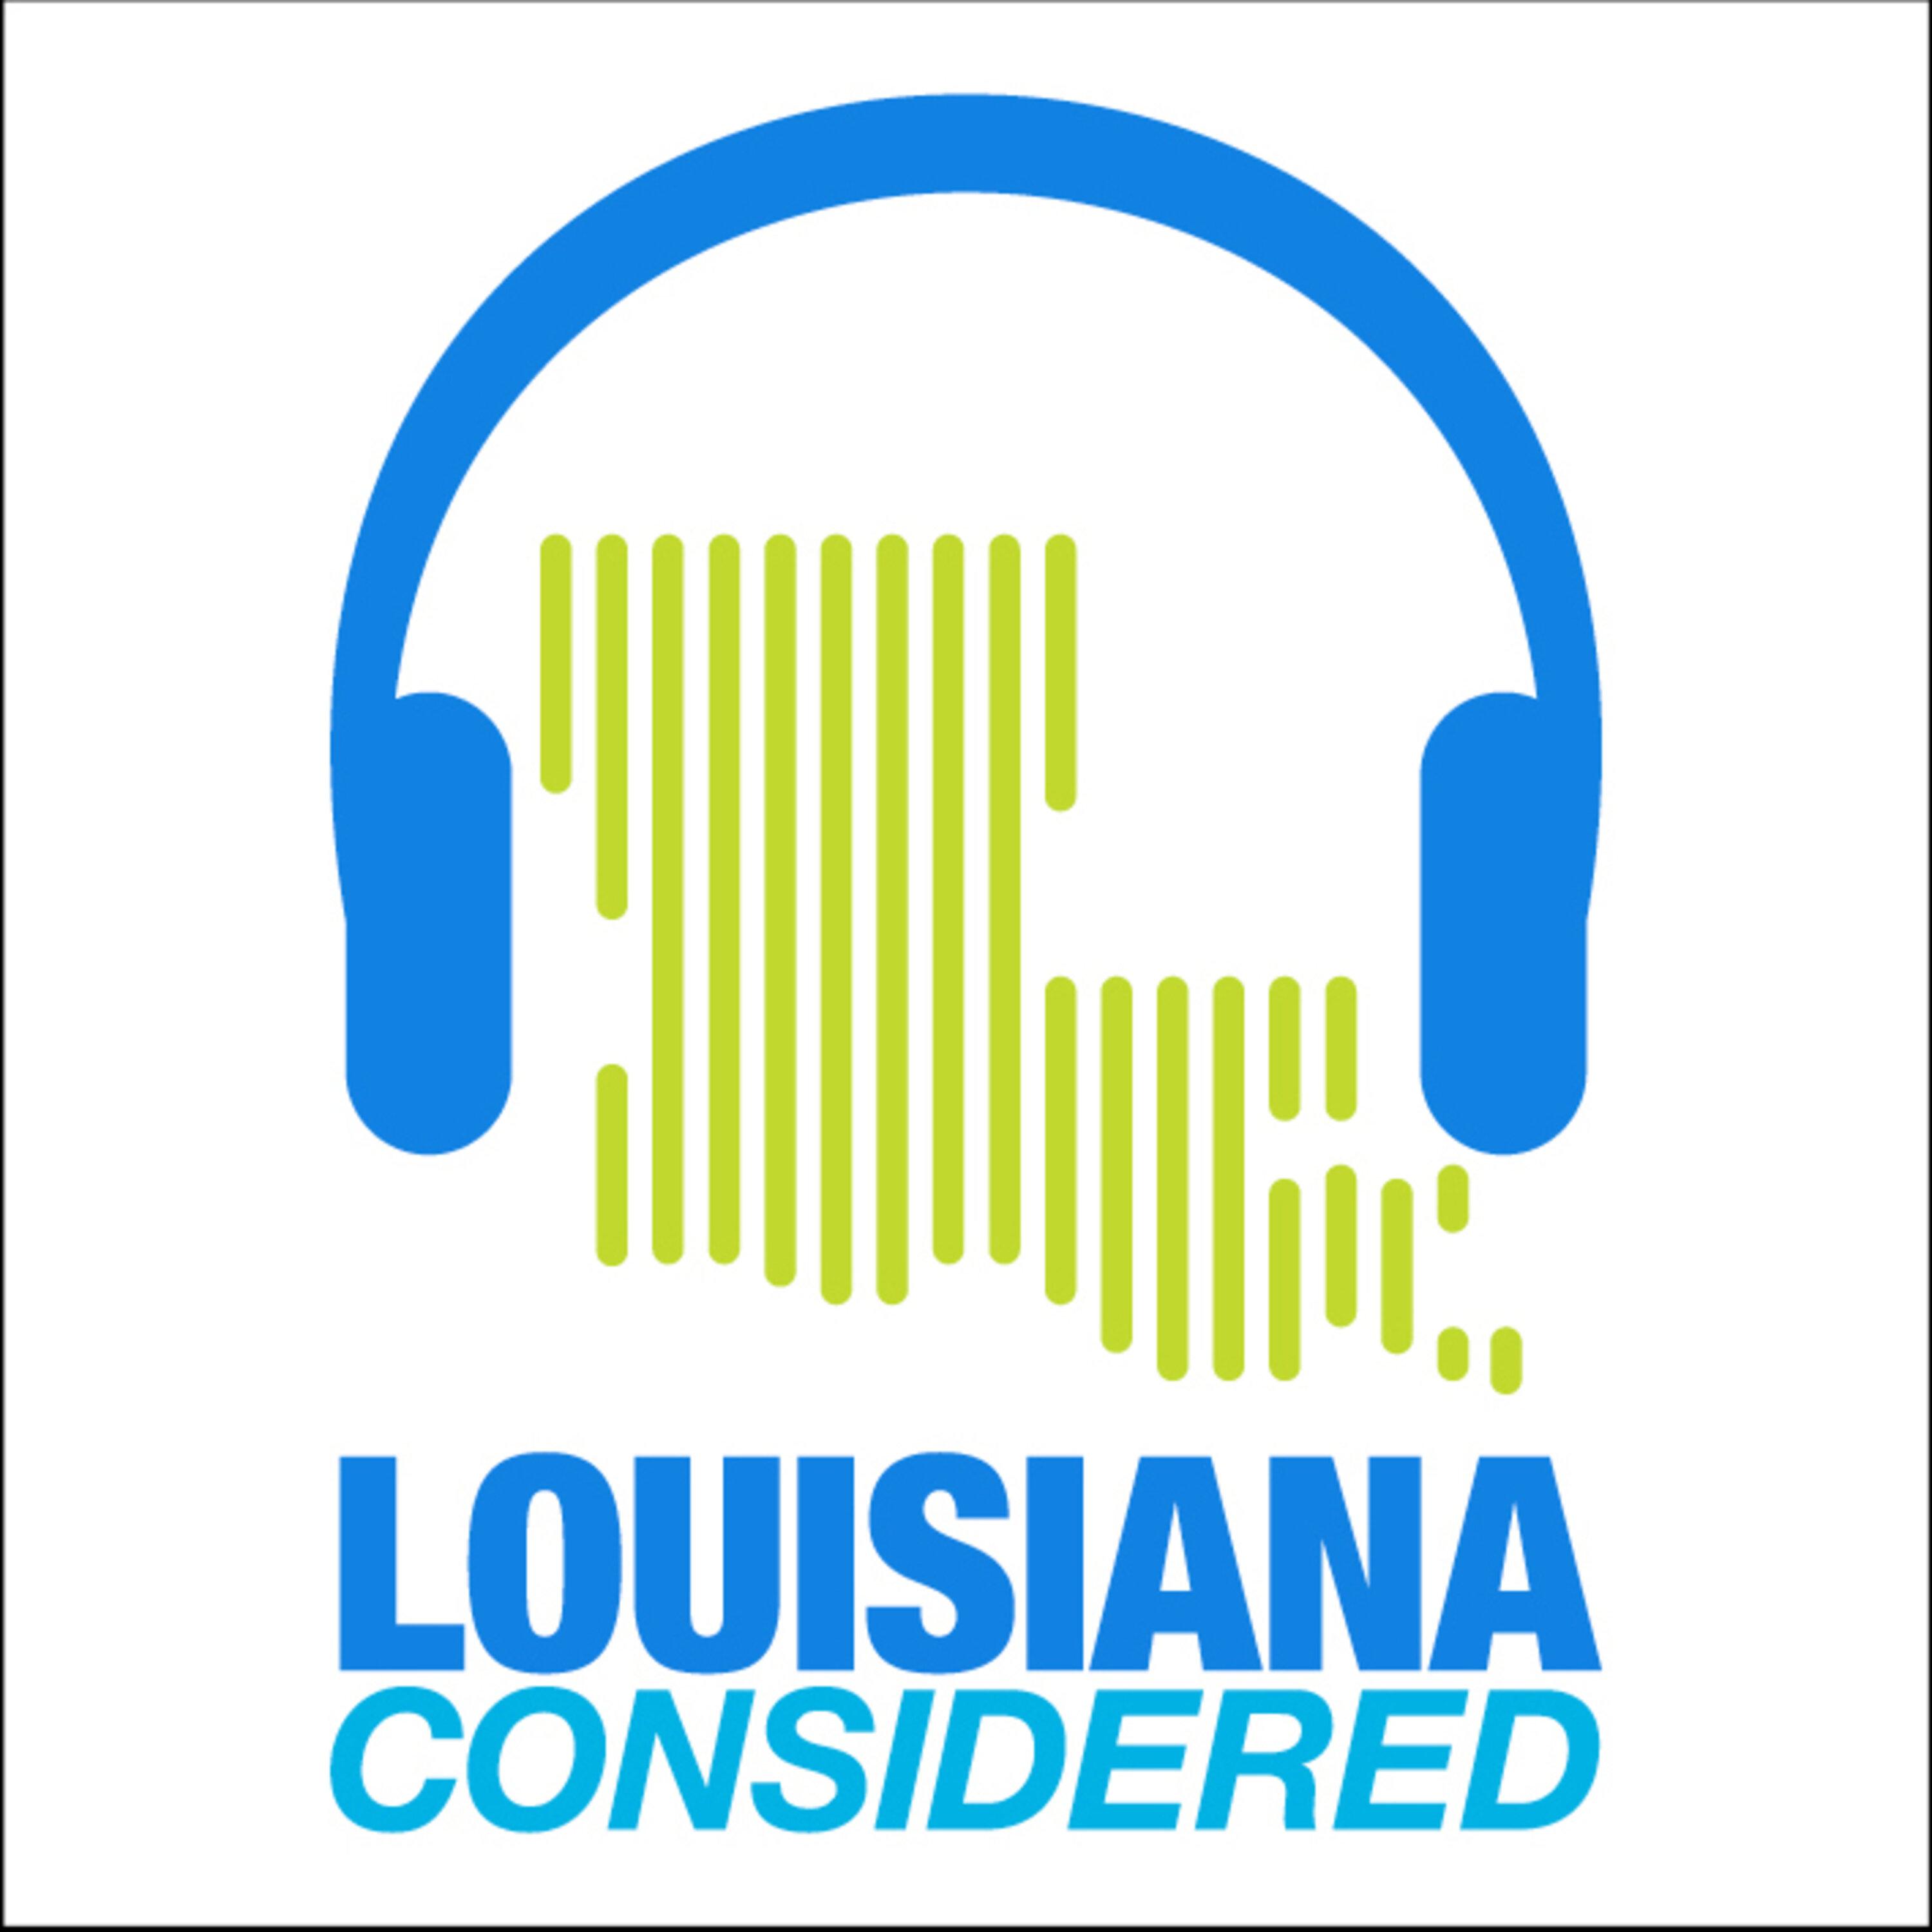 Thumbnail for "Louisiana Considered: Red River Parish’s Balanced School Calendar, New At NOMA, An Interview With Borris Anthony York".